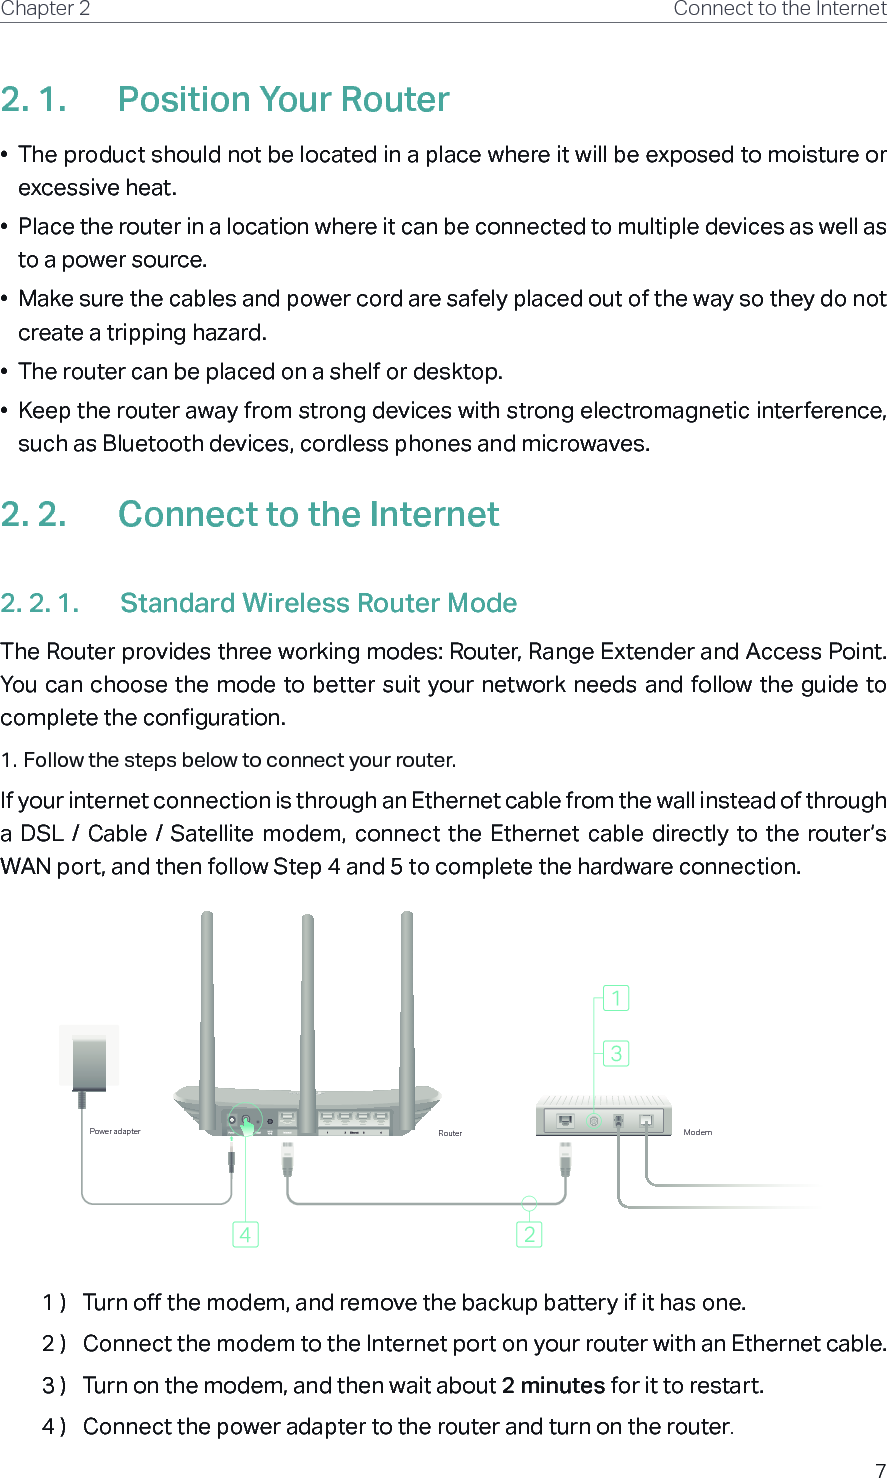 7Chapter 2 Connect to the Internet2. 1.  Position Your Router•  The product should not be located in a place where it will be exposed to moisture or excessive heat.•  Place the router in a location where it can be connected to multiple devices as well as to a power source.•  Make sure the cables and power cord are safely placed out of the way so they do not create a tripping hazard.•  The router can be placed on a shelf or desktop.•  Keep the router away from strong devices with strong electromagnetic interference, such as Bluetooth devices, cordless phones and microwaves.2. 2.  Connect to the Internet2. 2. 1.  Standard Wireless Router ModeThe Router provides three working modes: Router, Range Extender and Access Point. You can choose the mode to better suit your network needs and follow the guide to complete the configuration.1. Follow the steps below to connect your router.If your internet connection is through an Ethernet cable from the wall instead of through a  DSL  /  Cable  /  Satellite modem, connect the Ethernet  cable  directly to  the  router’s WAN port, and then follow Step 4 and 5 to complete the hardware connection.ModemRouterPower adapter1 )  Turn off the modem, and remove the backup battery if it has one.2 )  Connect the modem to the Internet port on your router with an Ethernet cable.3 )  Turn on the modem, and then wait about 2 minutes for it to restart.4 )  Connect the power adapter to the router and turn on the router.